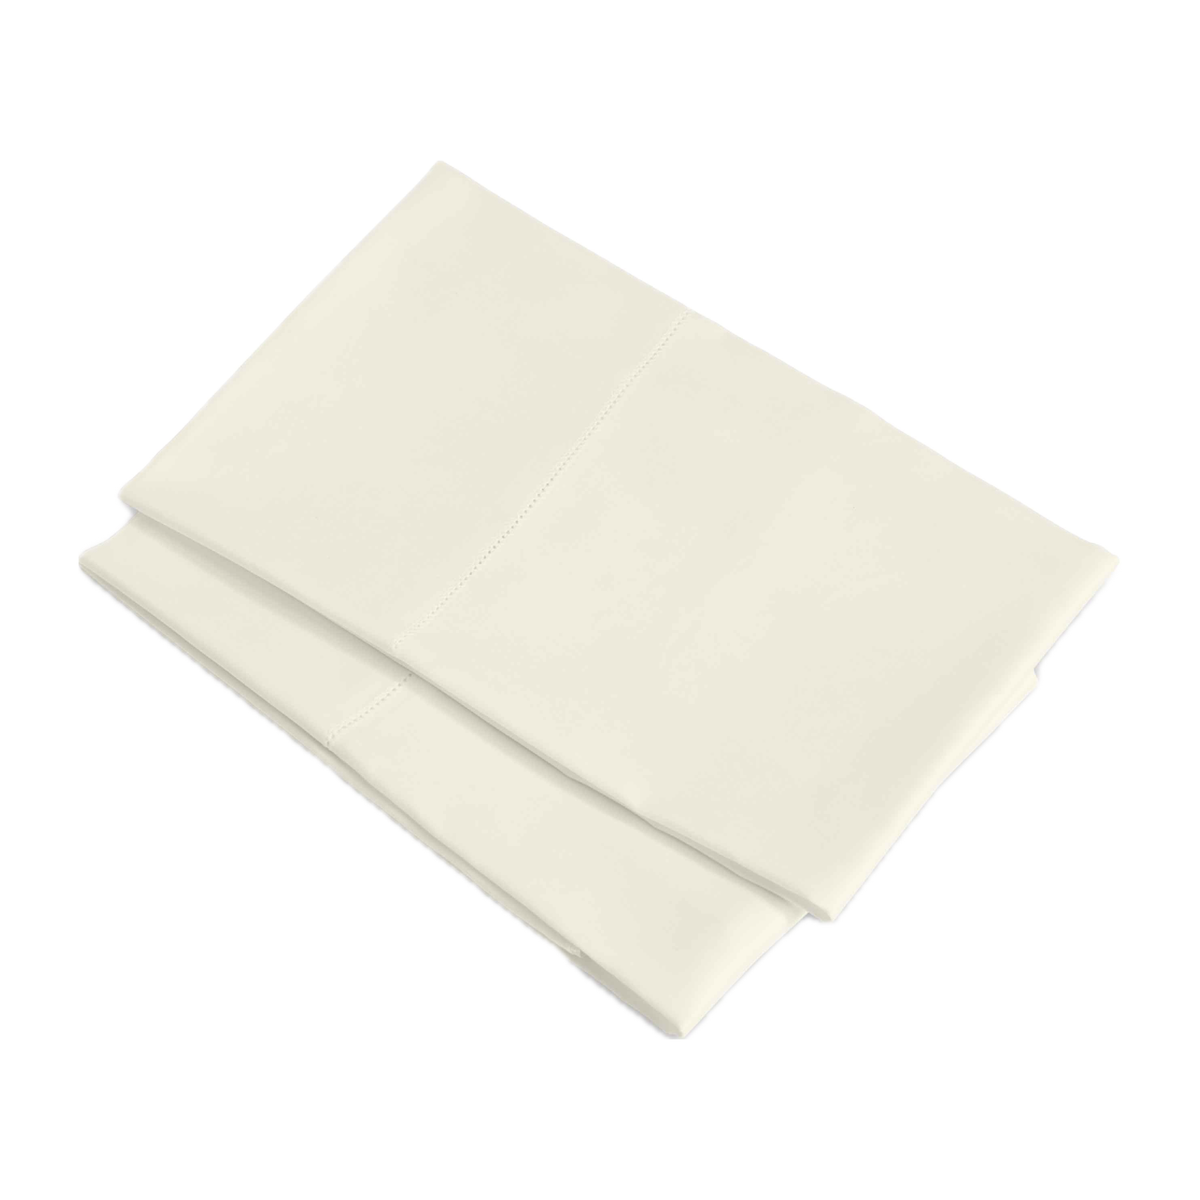 Folded Signoria Nuvola Bedding Pillowcases in Ivory Color